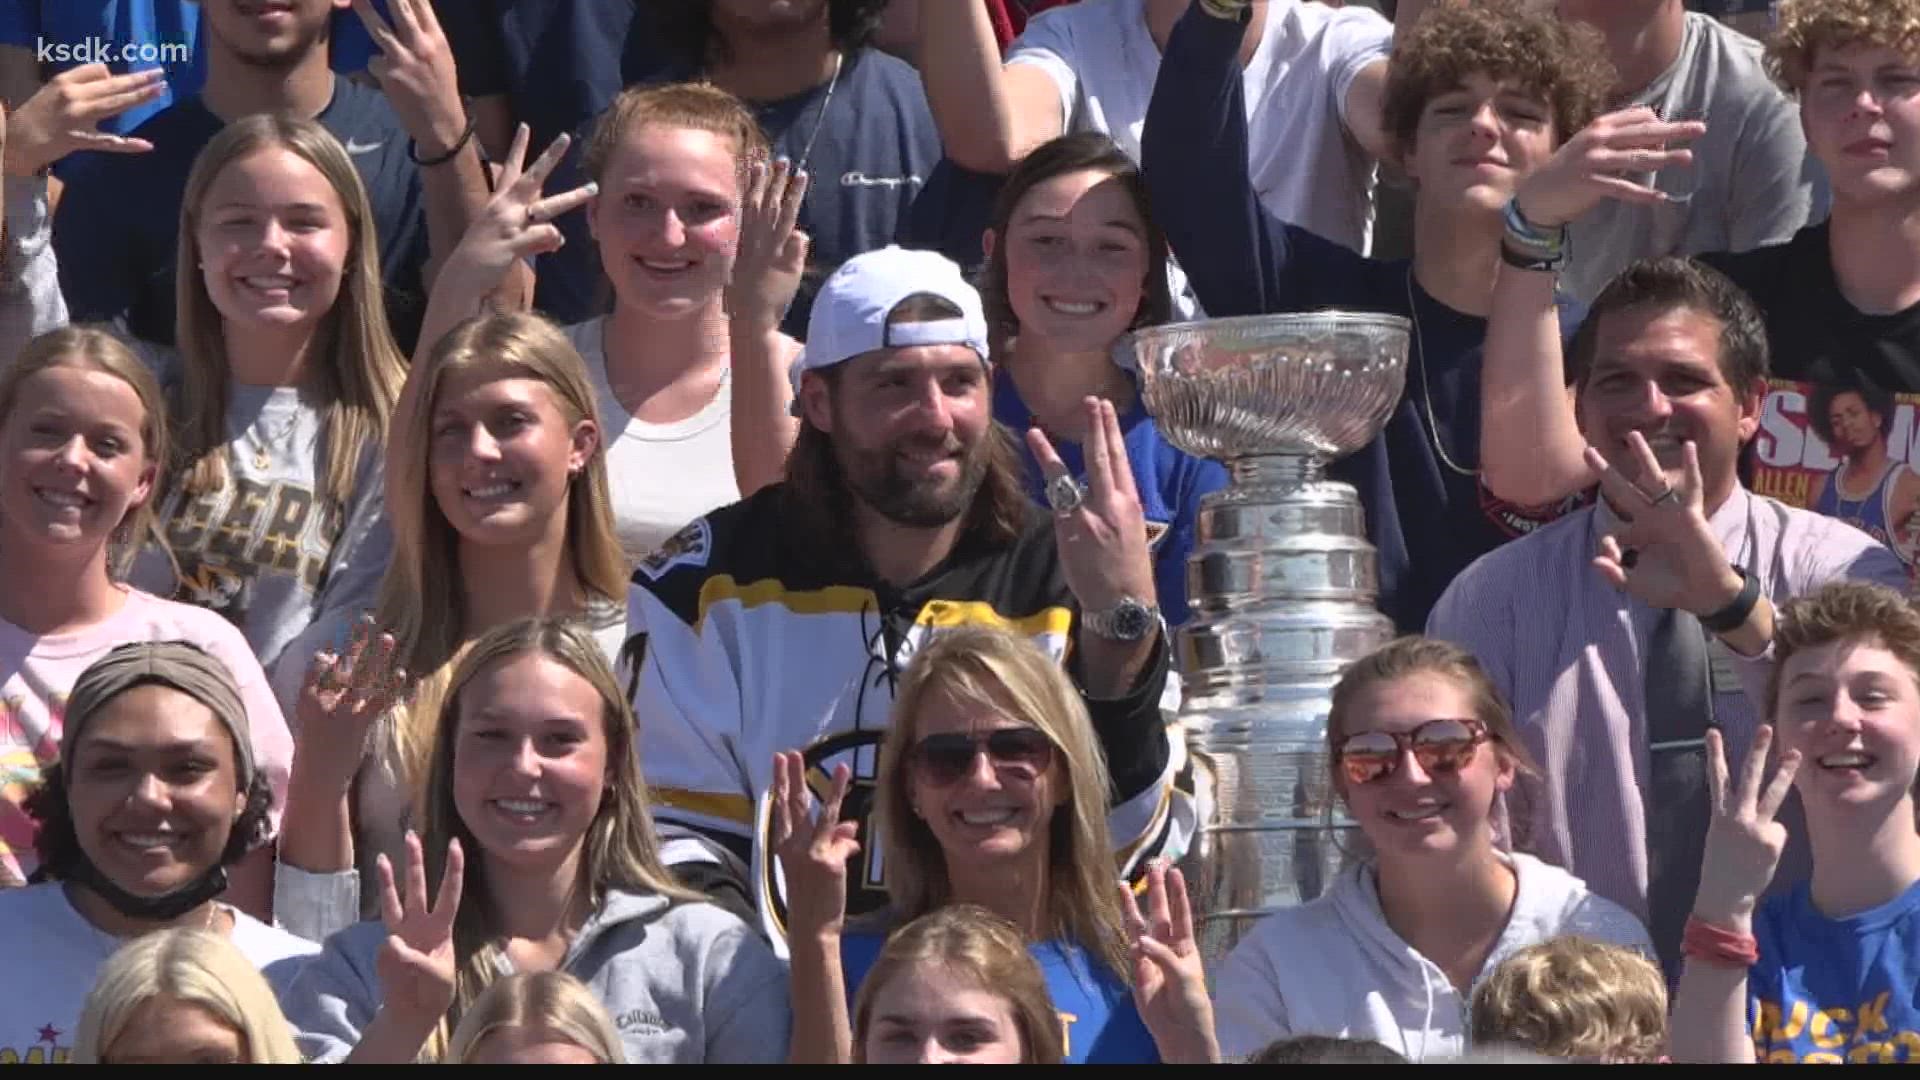 Stanley Cup Champion Pat Maroon brings the Cup to his hometown